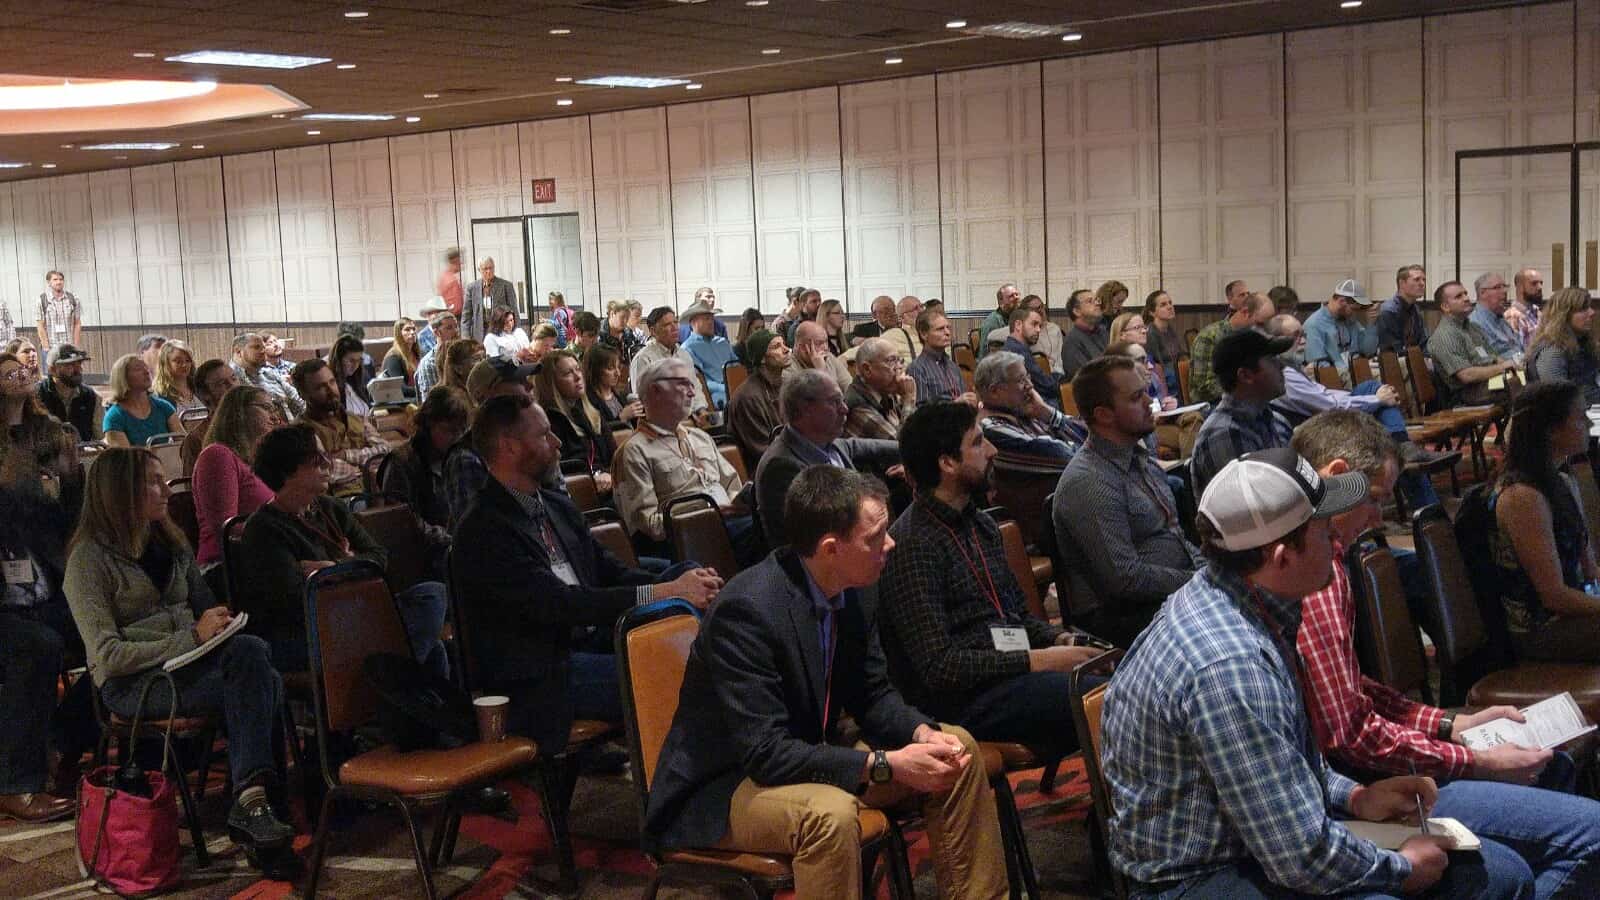 A packed audience watches presentations at the 2018 Society for Range Management's special symposia on sagebrush ecosystems.